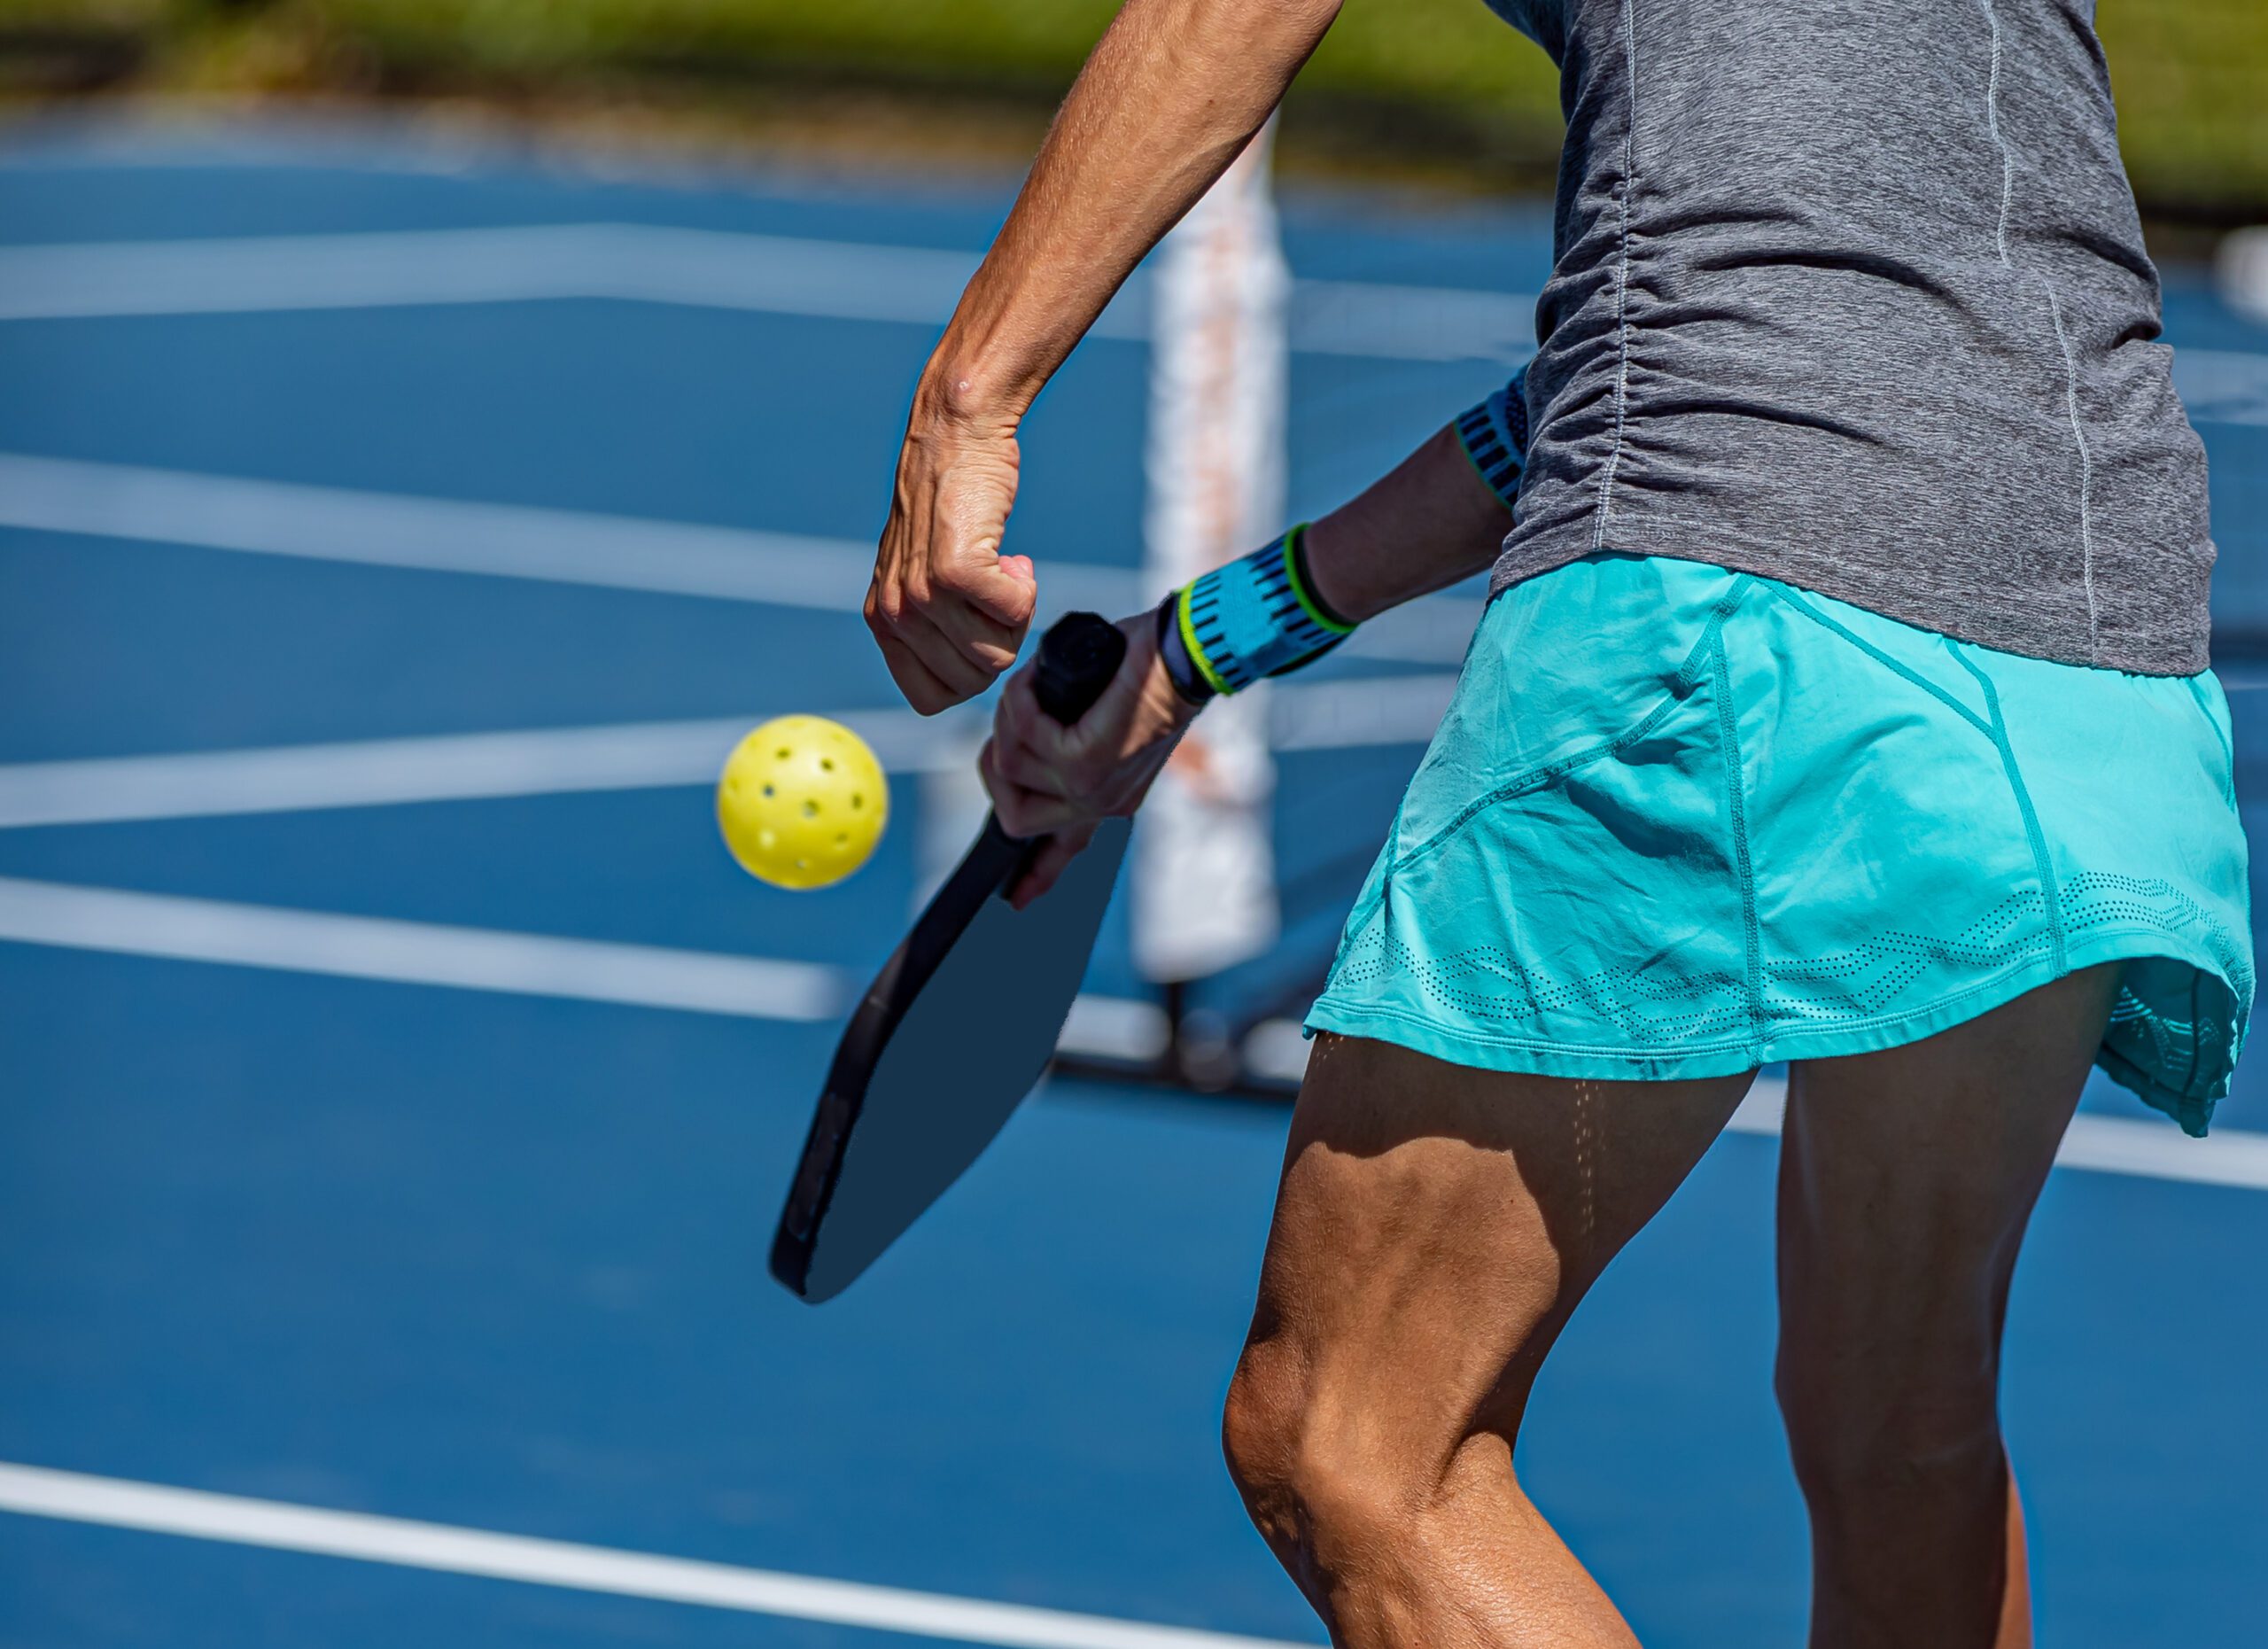 Rising Pickleball Injuries Could Result in 67,000 ER Visits This Year